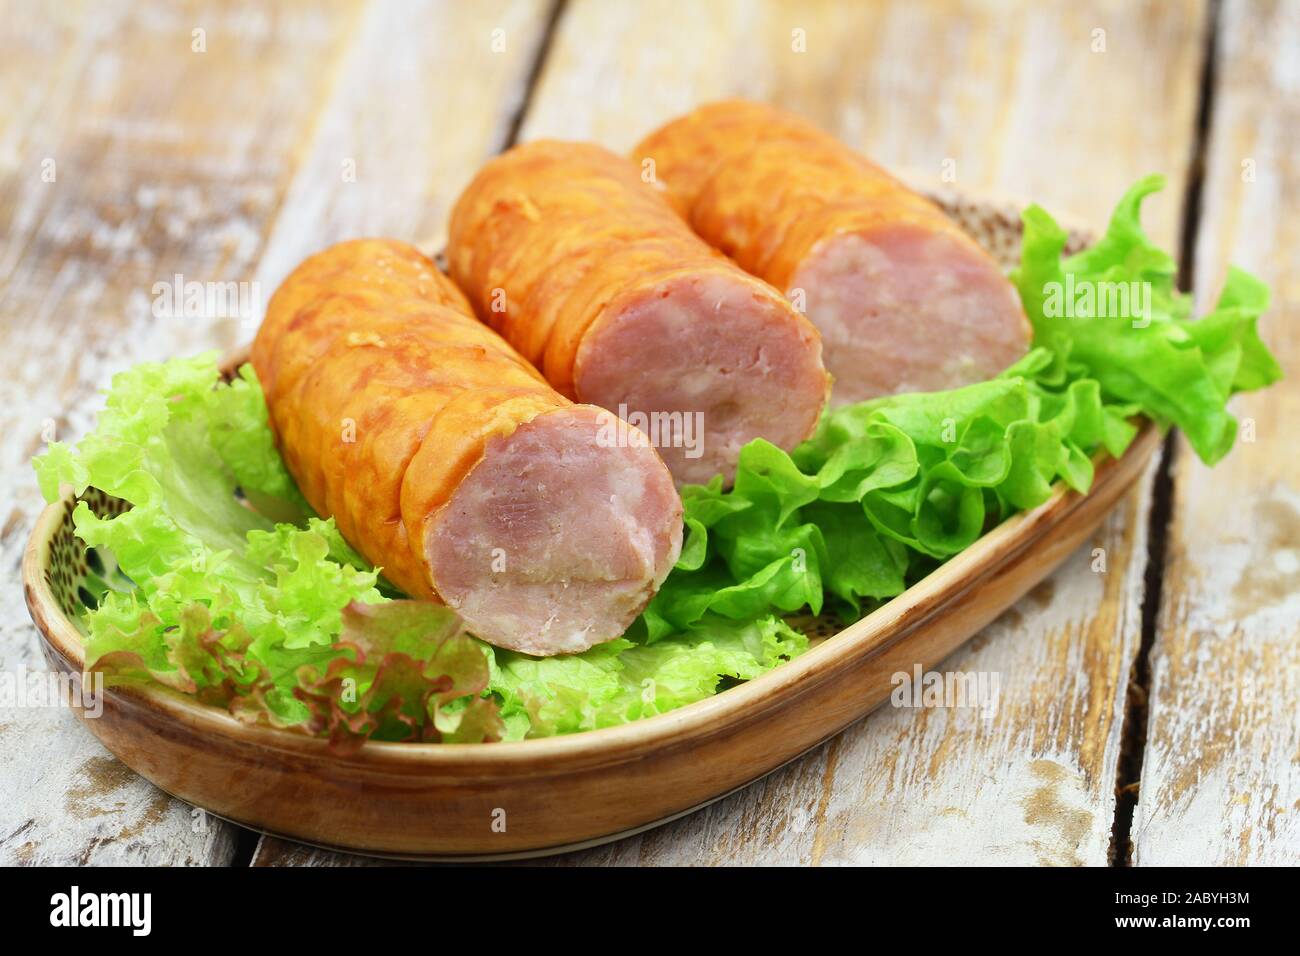 Plate of traditional Polish pork sausage on lettuce on plate on wooden surface Stock Photo